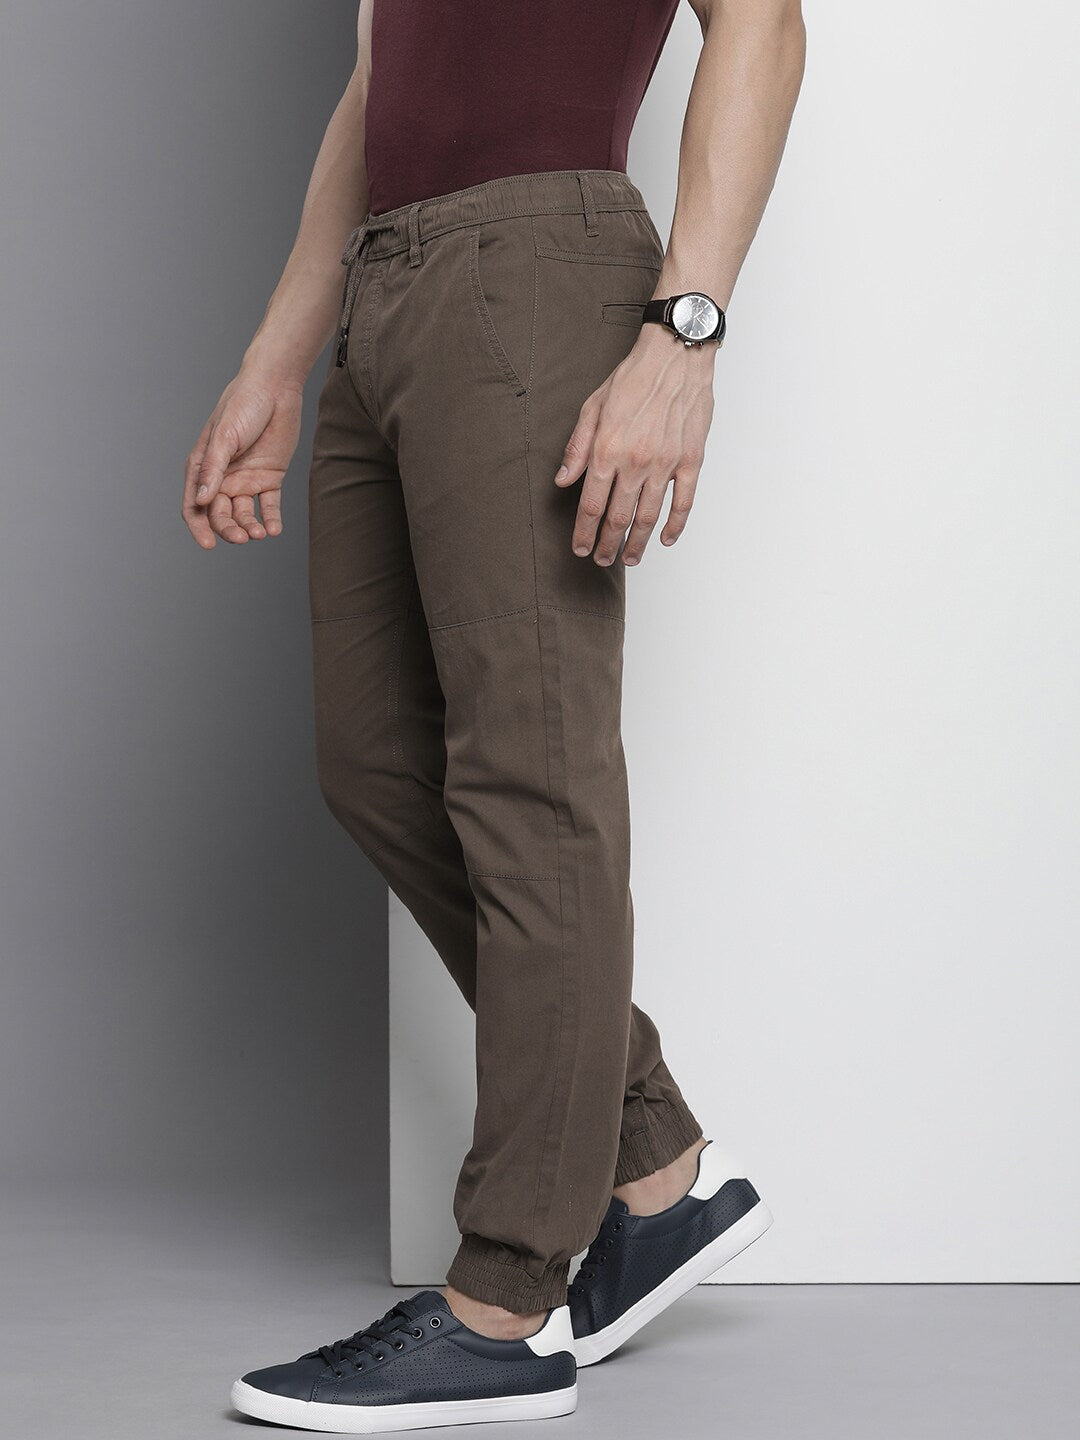 Buy The Indian Garage Co Men Green Slim Fit Linen Trousers - Trousers for  Men 20554182 | Myntra